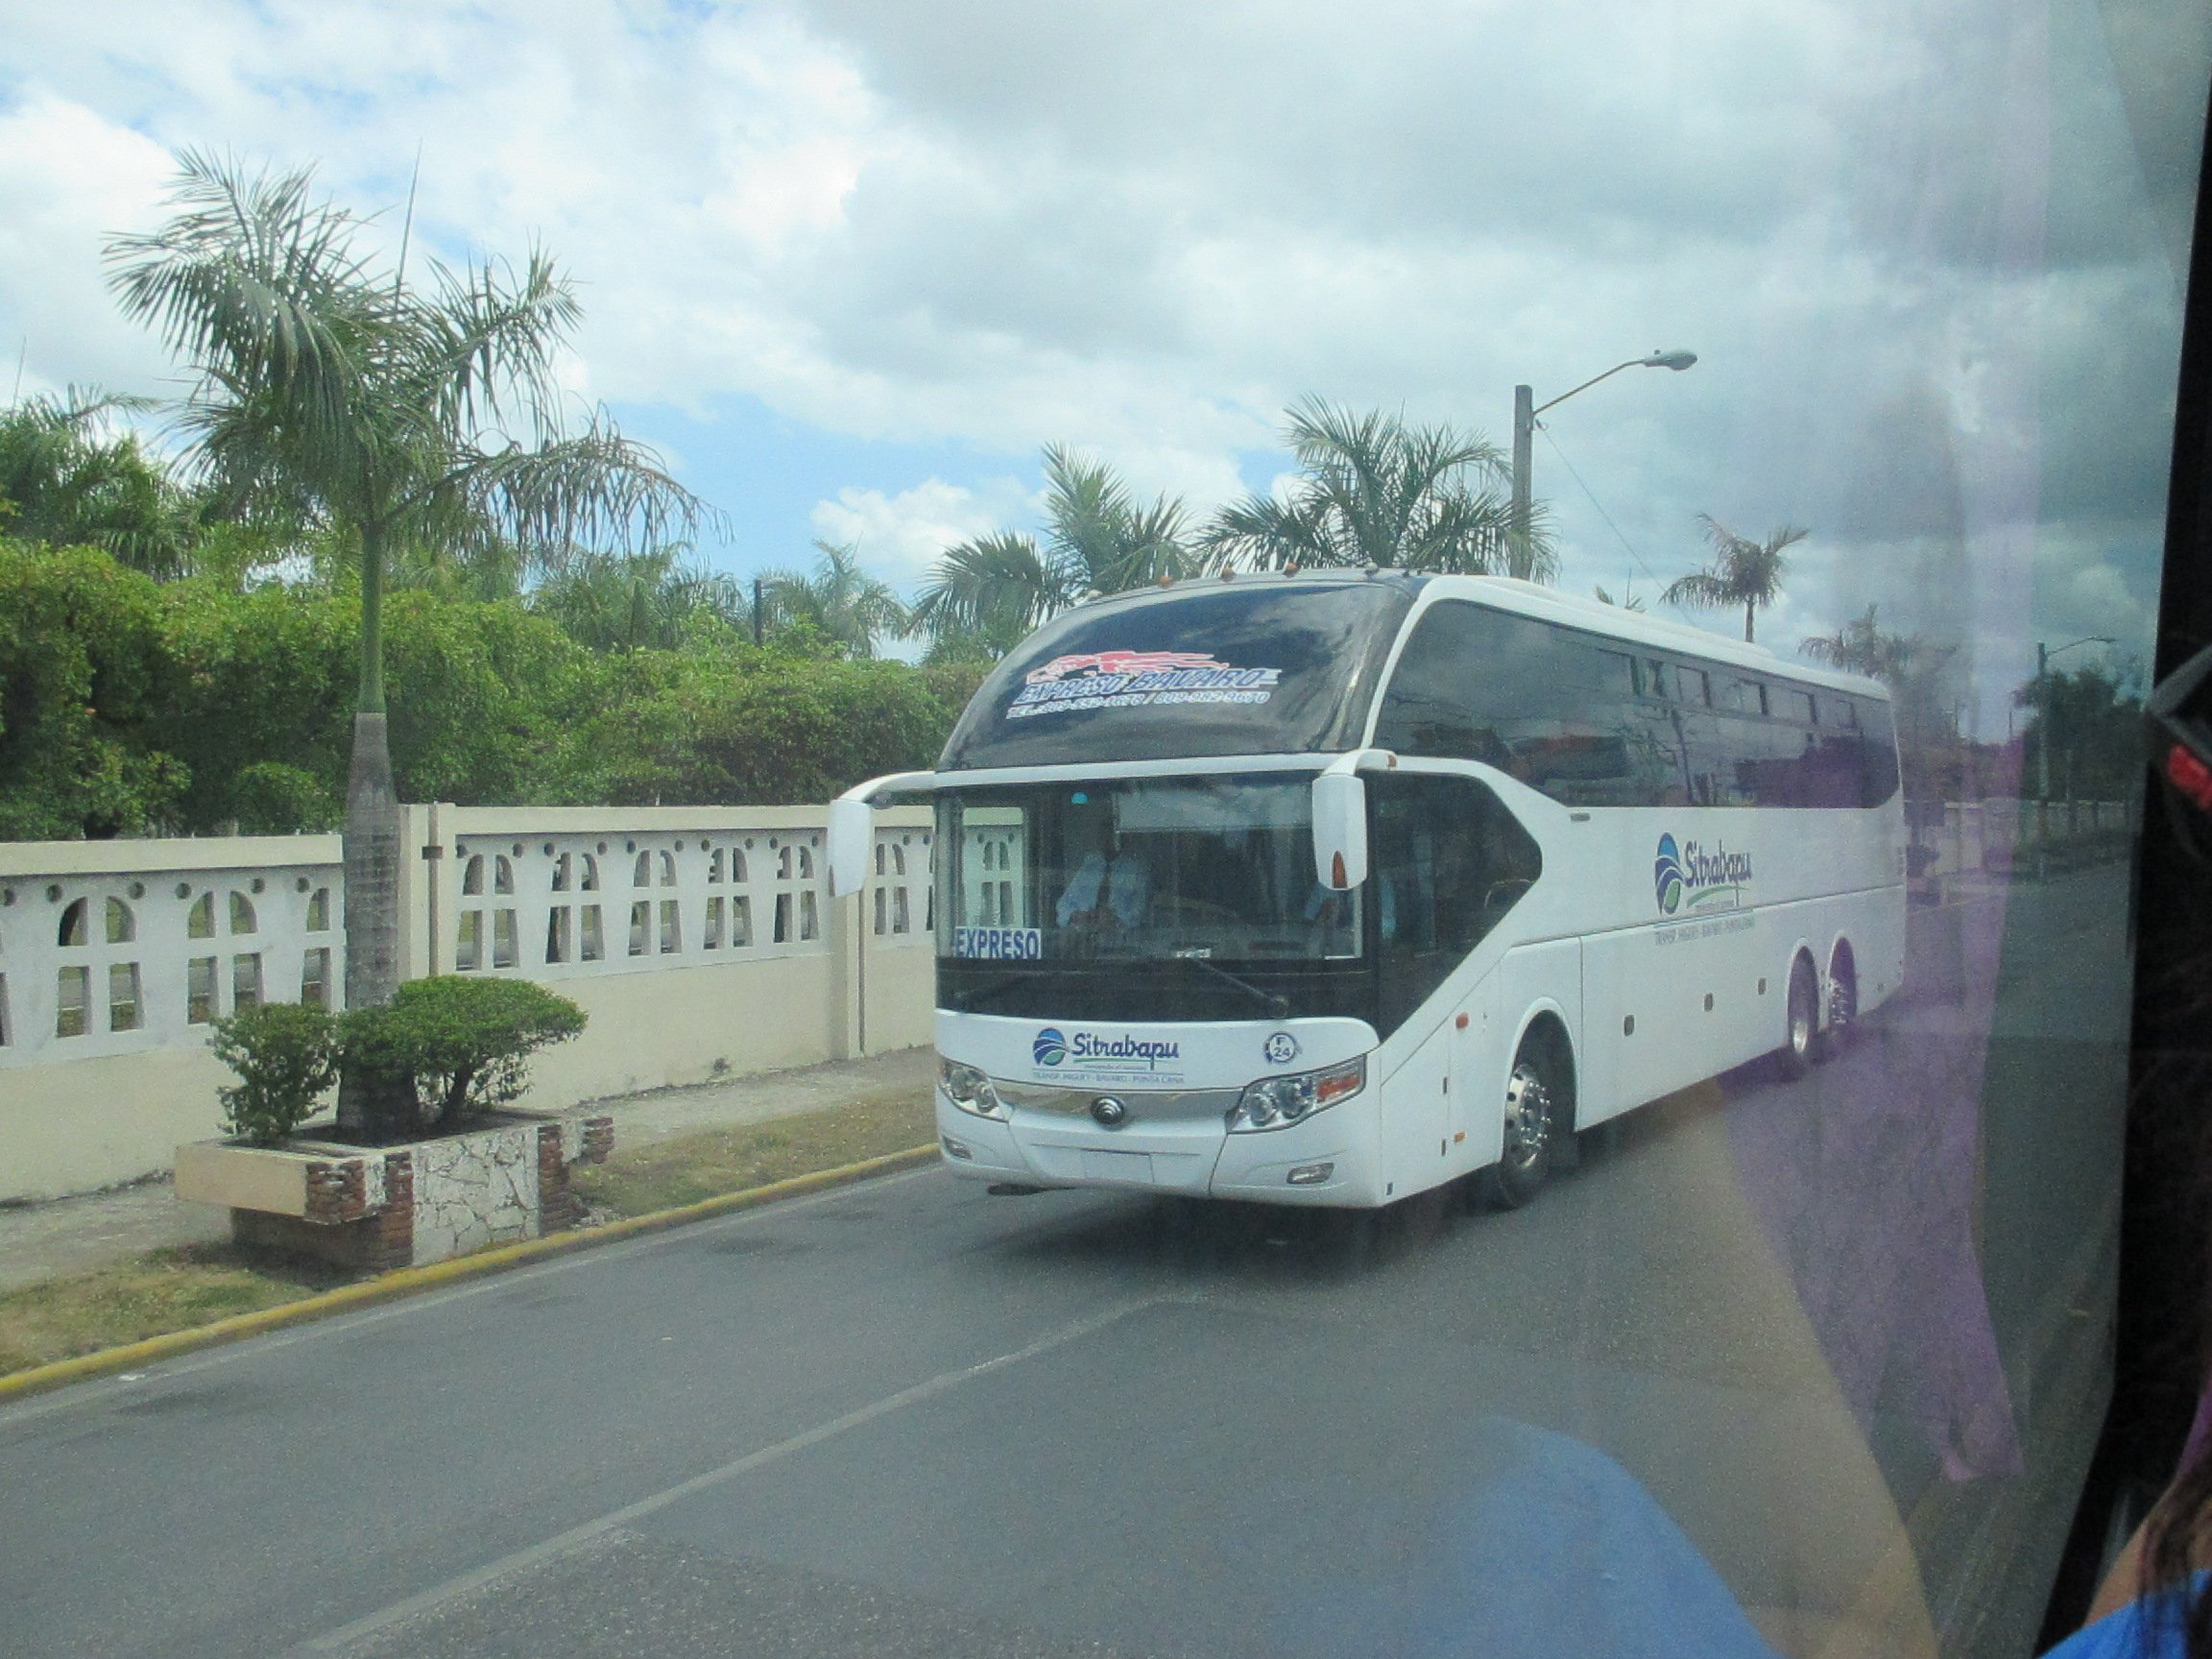 How To Get From Punta Cana Airport to Boca Chica - All Possible Ways, cheapest way from Punta Cana to Boca Chica, Punta Cana to Boca Chica, Punta Cana to Boca Chica bus, Punta Cana airport to Boca Chica, Bavaro Bus Expreso Punta Cana to Boca Chica